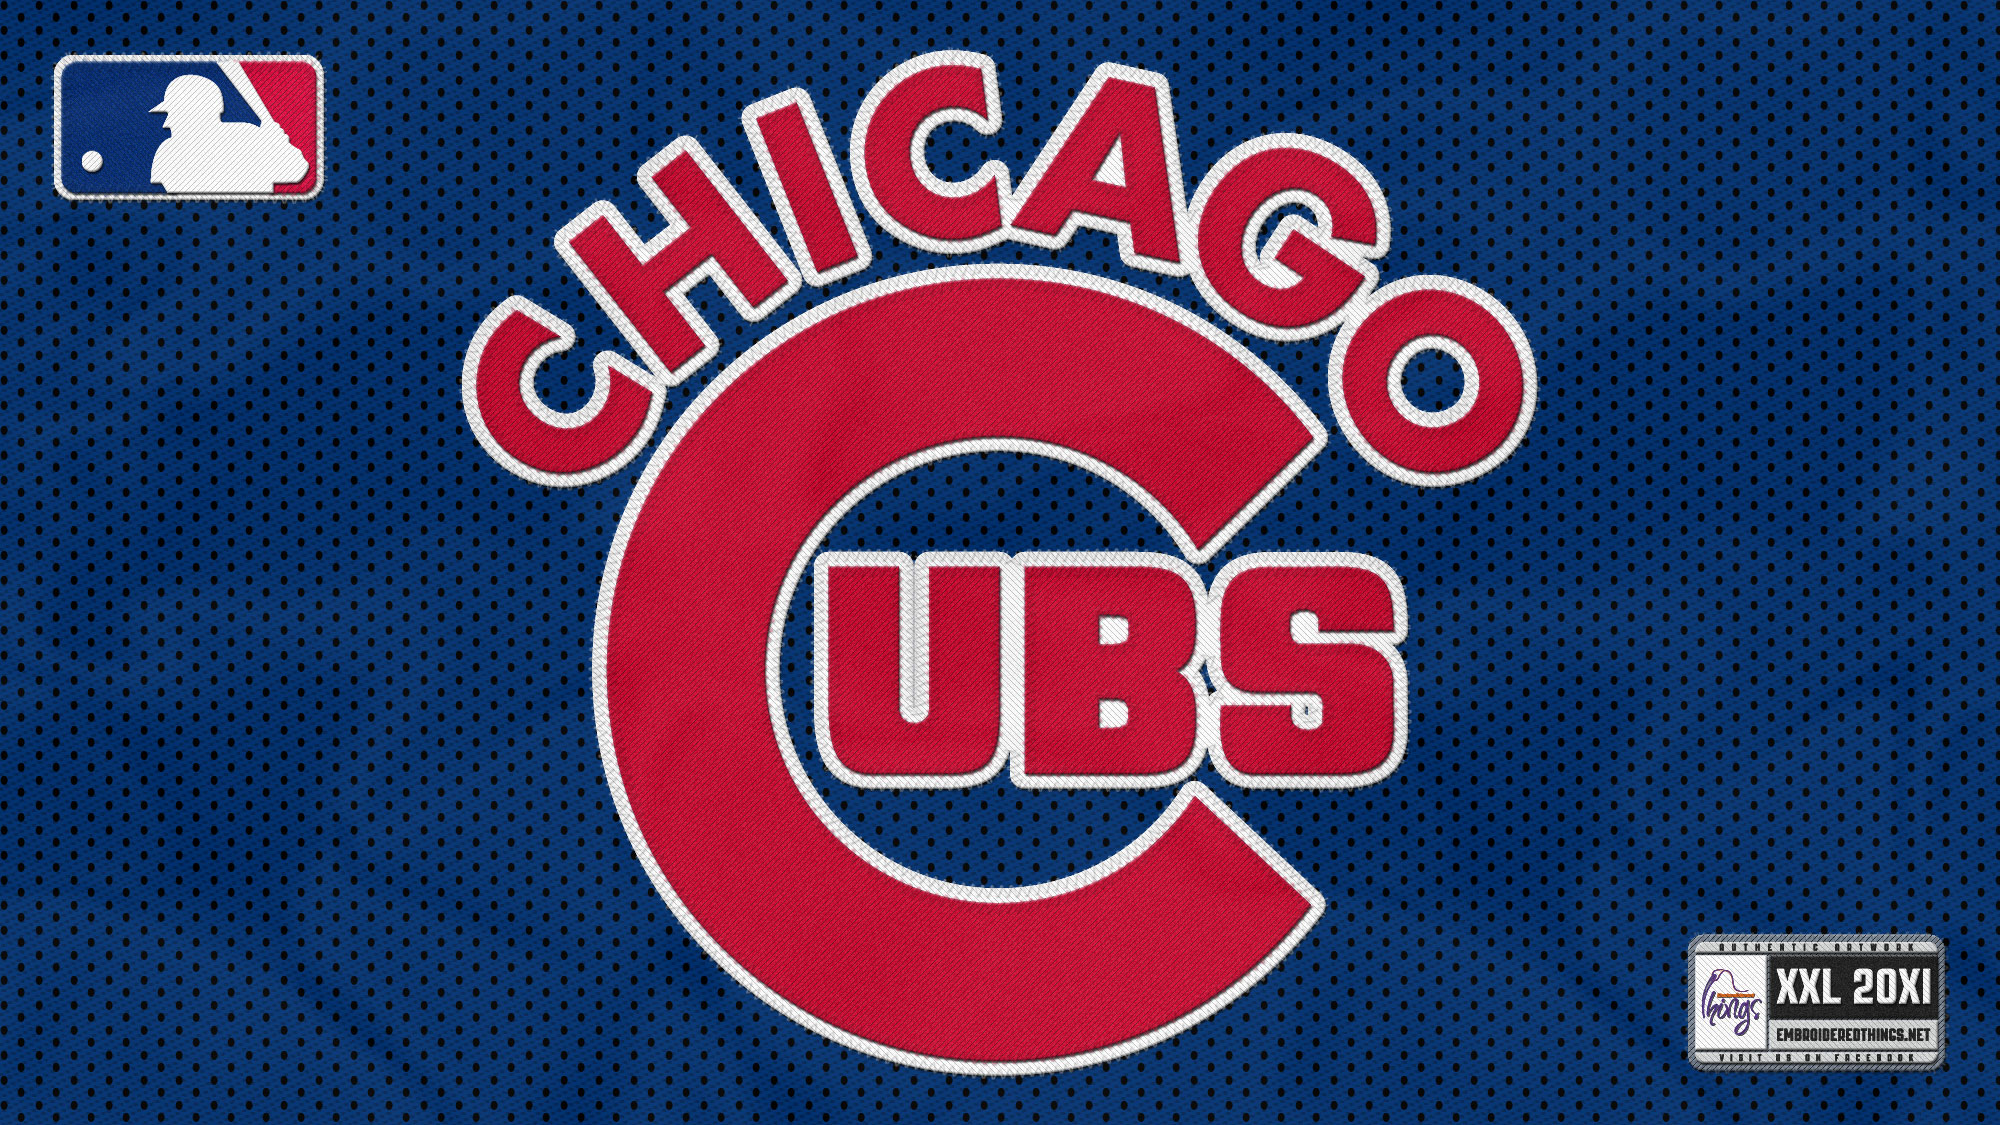 Chicago Cubs HD Image Wallpaper